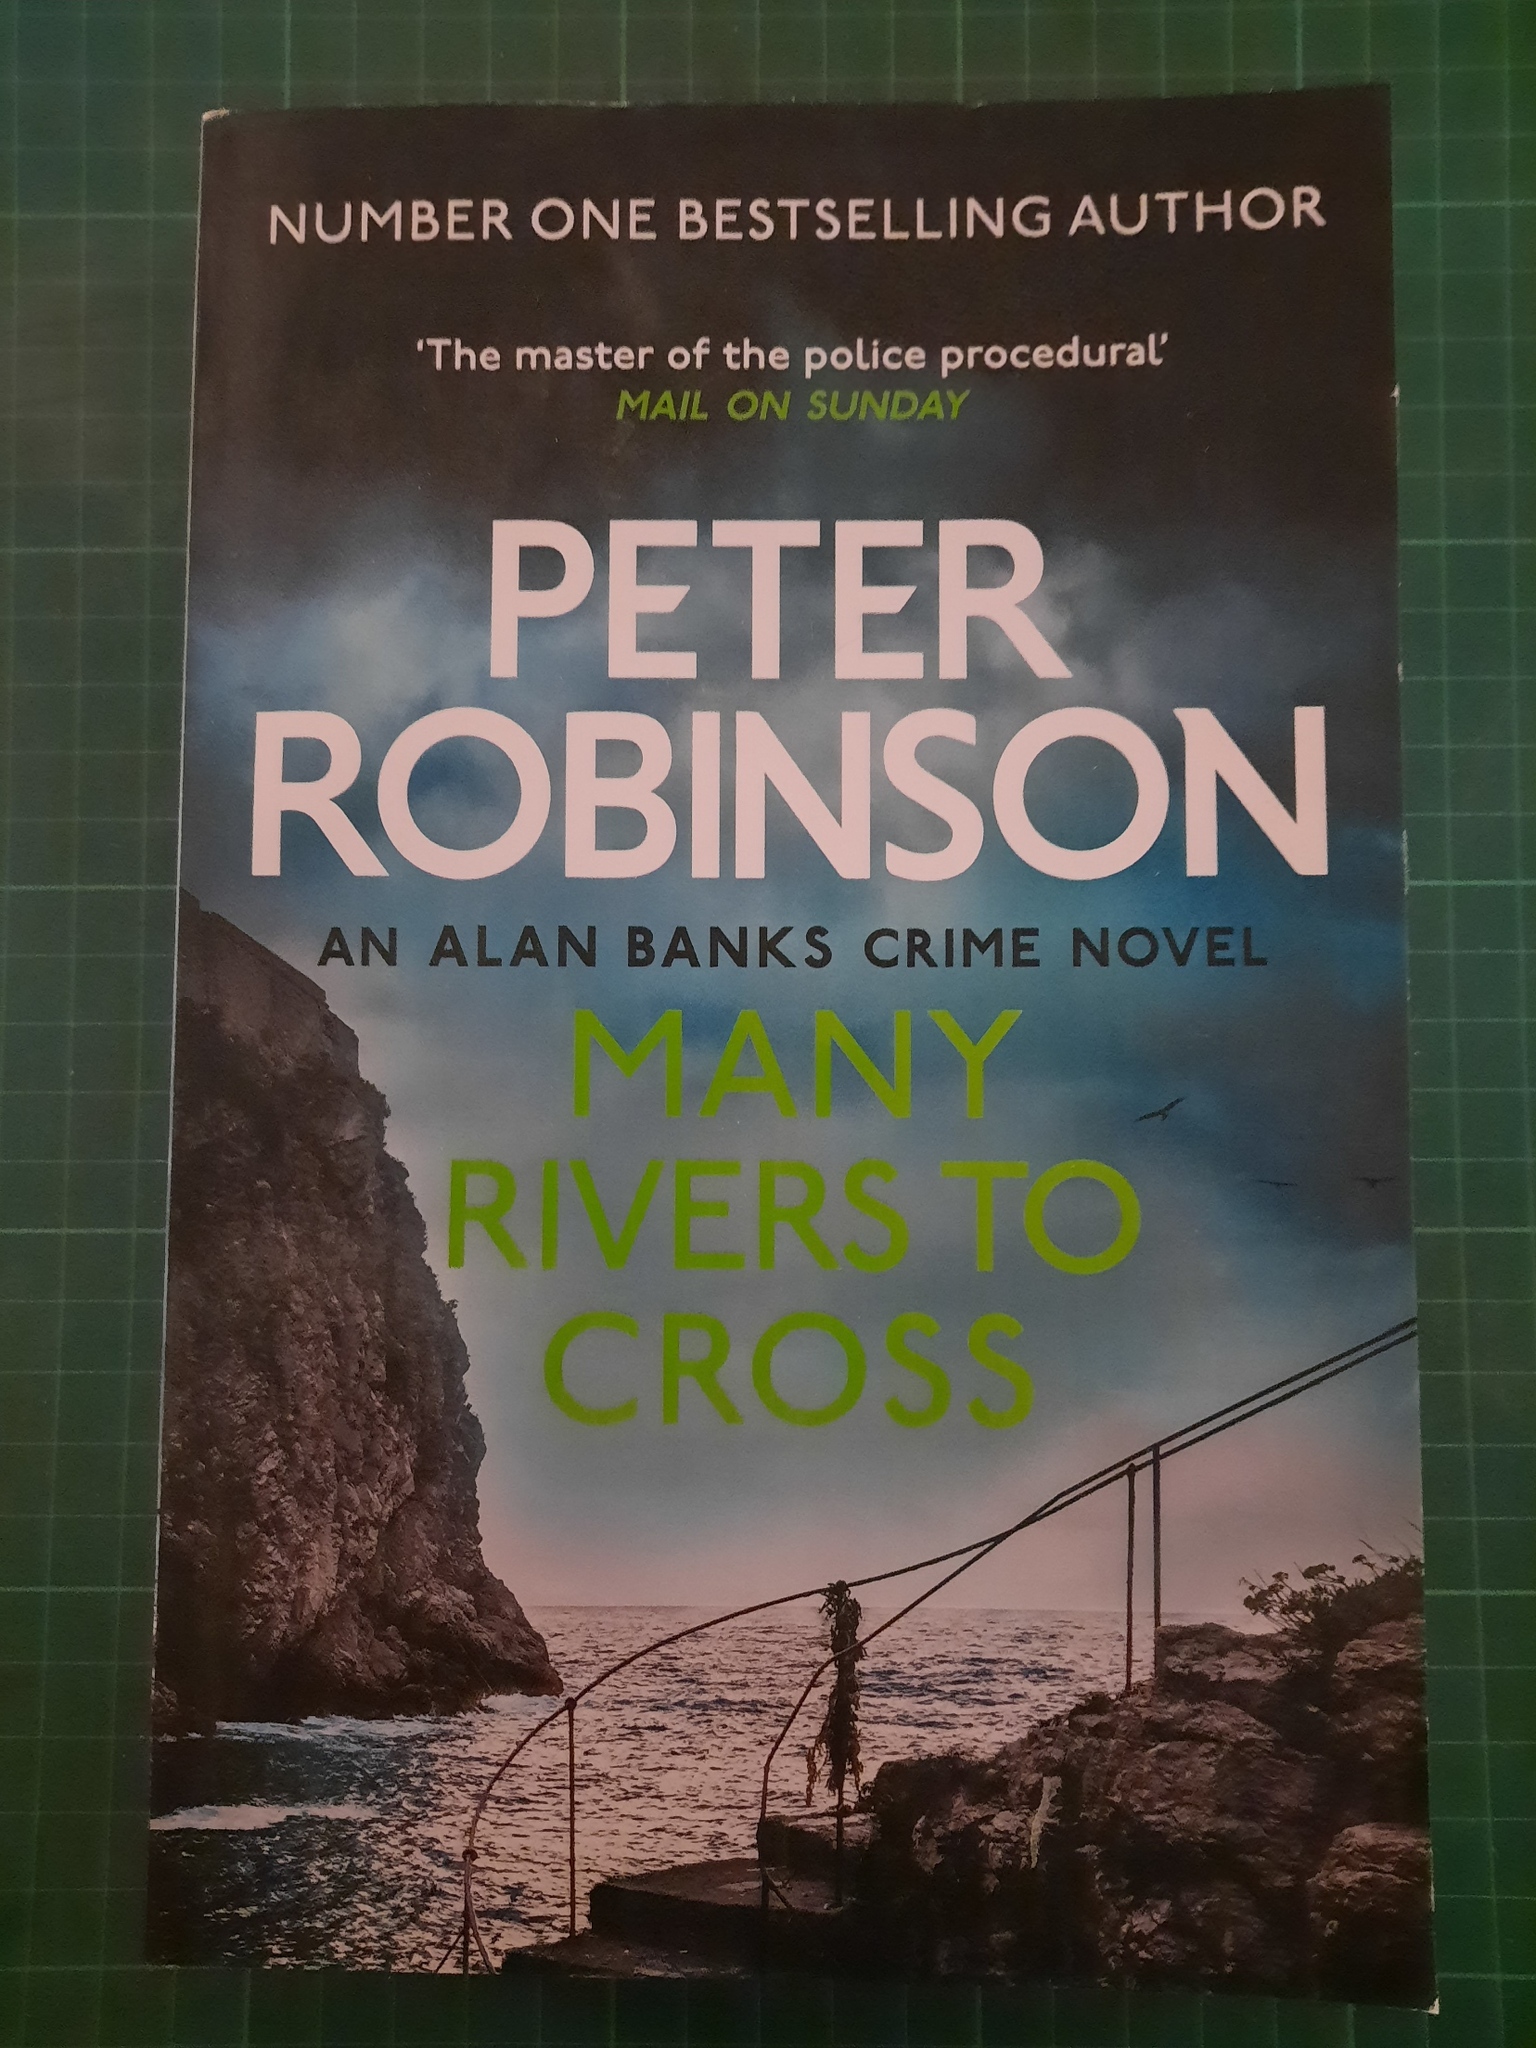 Peter Robinson : Many rivers to cross